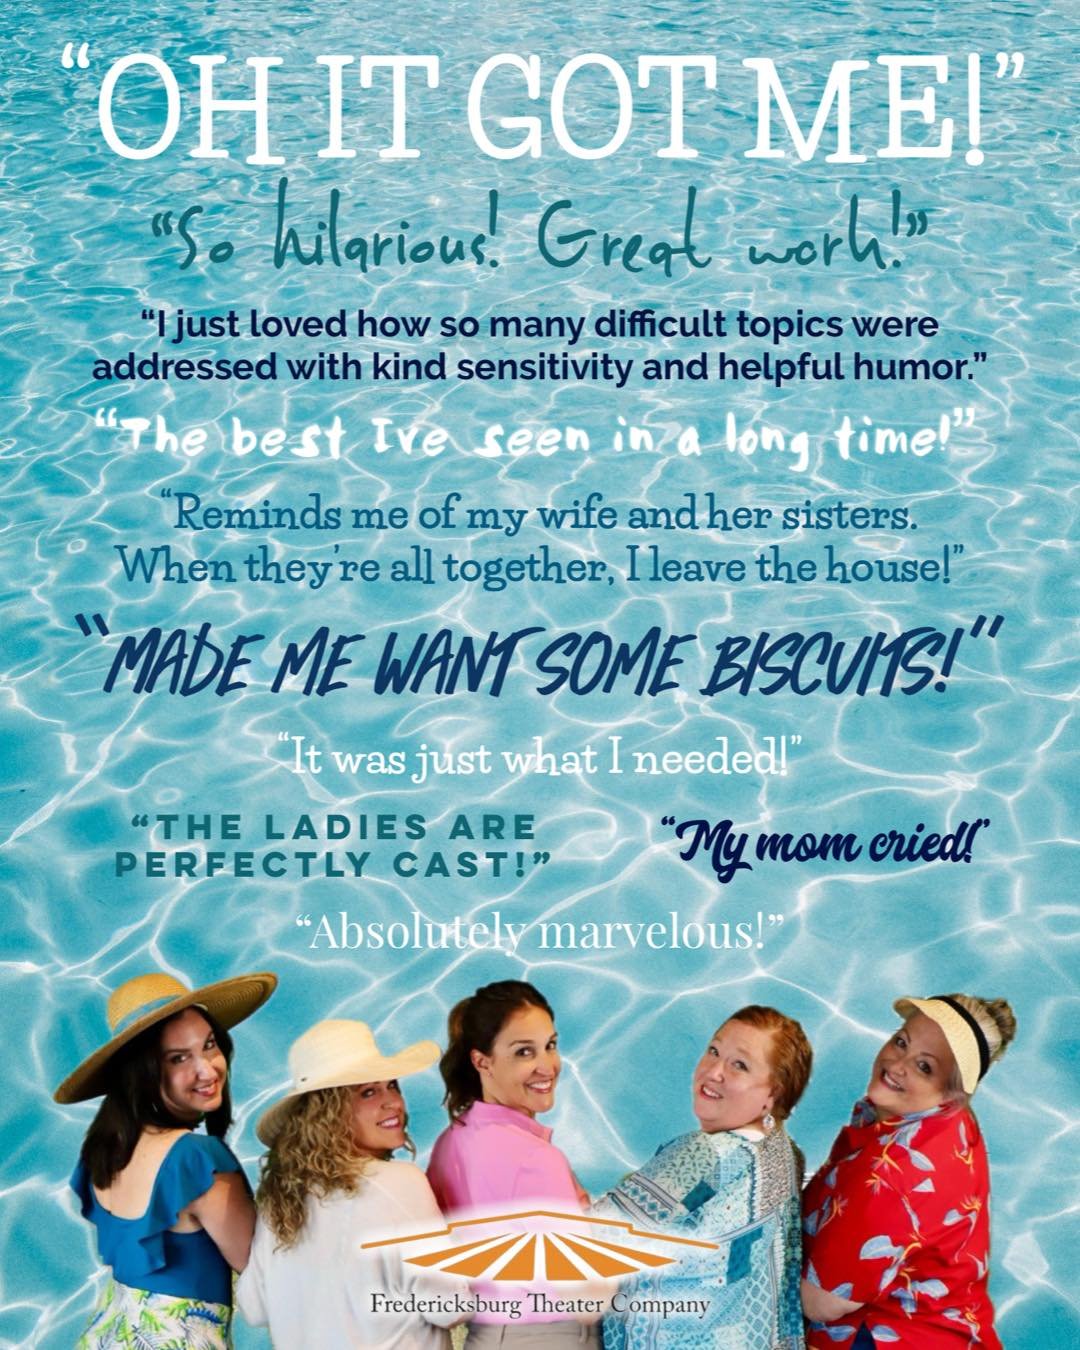 Audiences are loving #TheSweetDelilahSwimClub! 🏖️🥹🏖️🤣
See for yourself how special this show is! Three more performances this weekend- get tickets NOW at fbgtc.org!